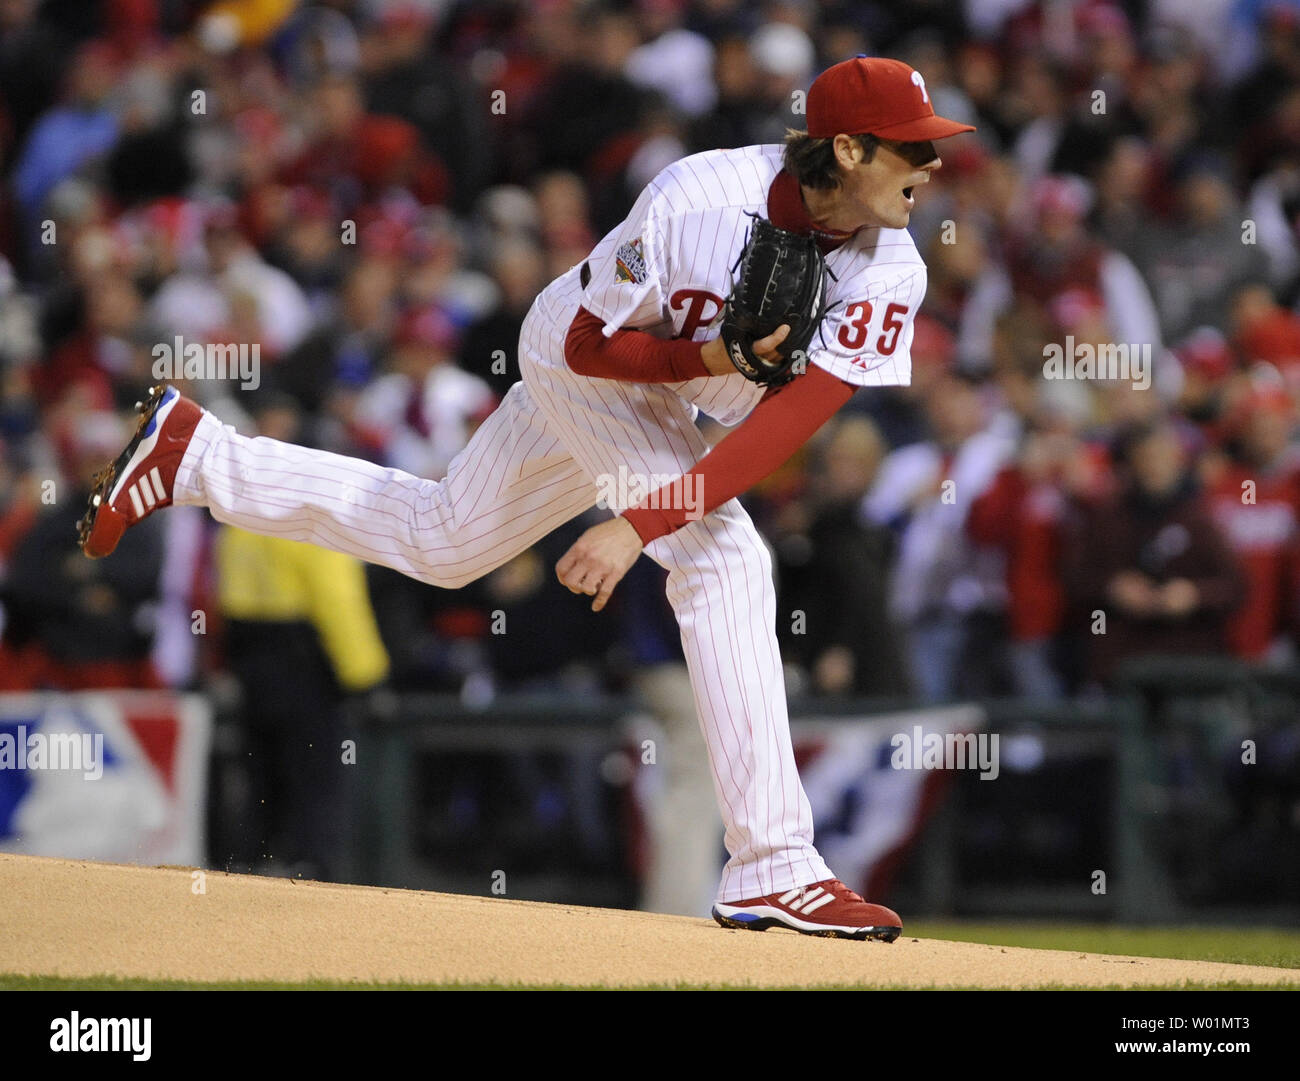 Philadelphia Phillies pitcher Cole Hamels pitches against the Tampa Bay  Rays during the first inning of game 5 of the World Series at Citizens Bank  Park in Philadelphia on October 27, 2008. (